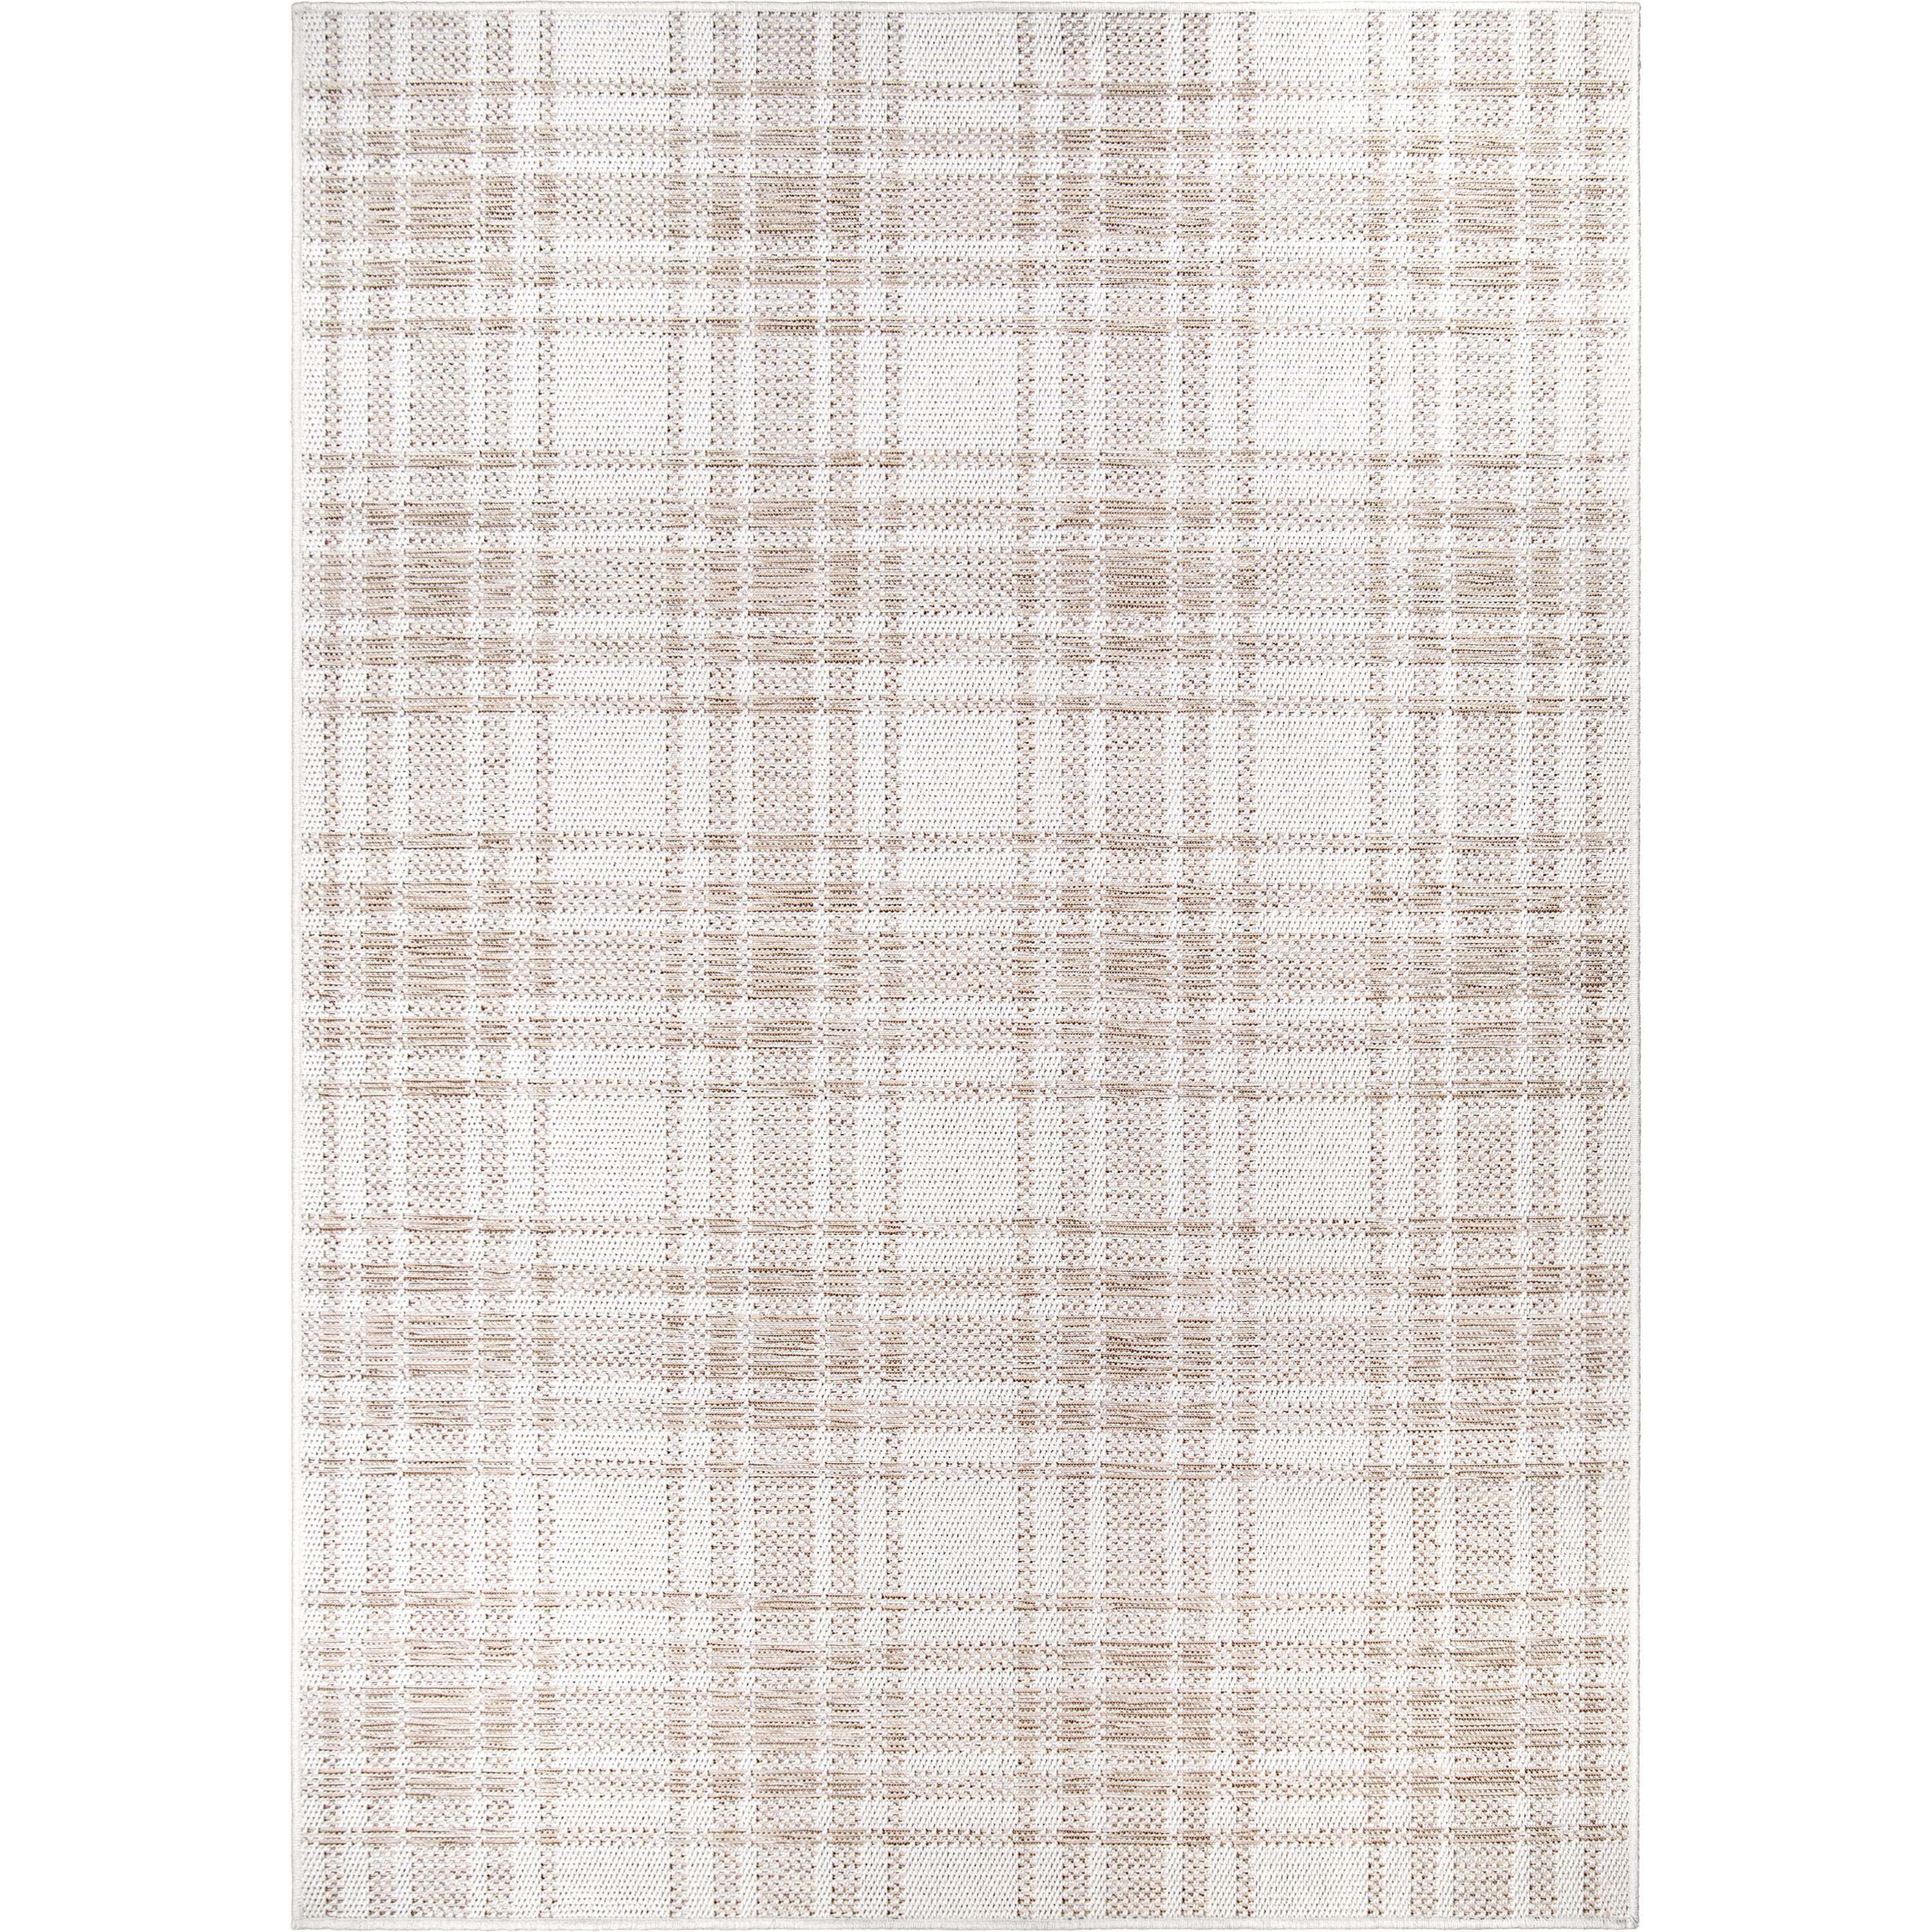 My Texas House Hampshire Plaid Reversible Indoor/ Outdoor Area Rug, Natural Driftwood, 8' x 10' | Walmart (US)